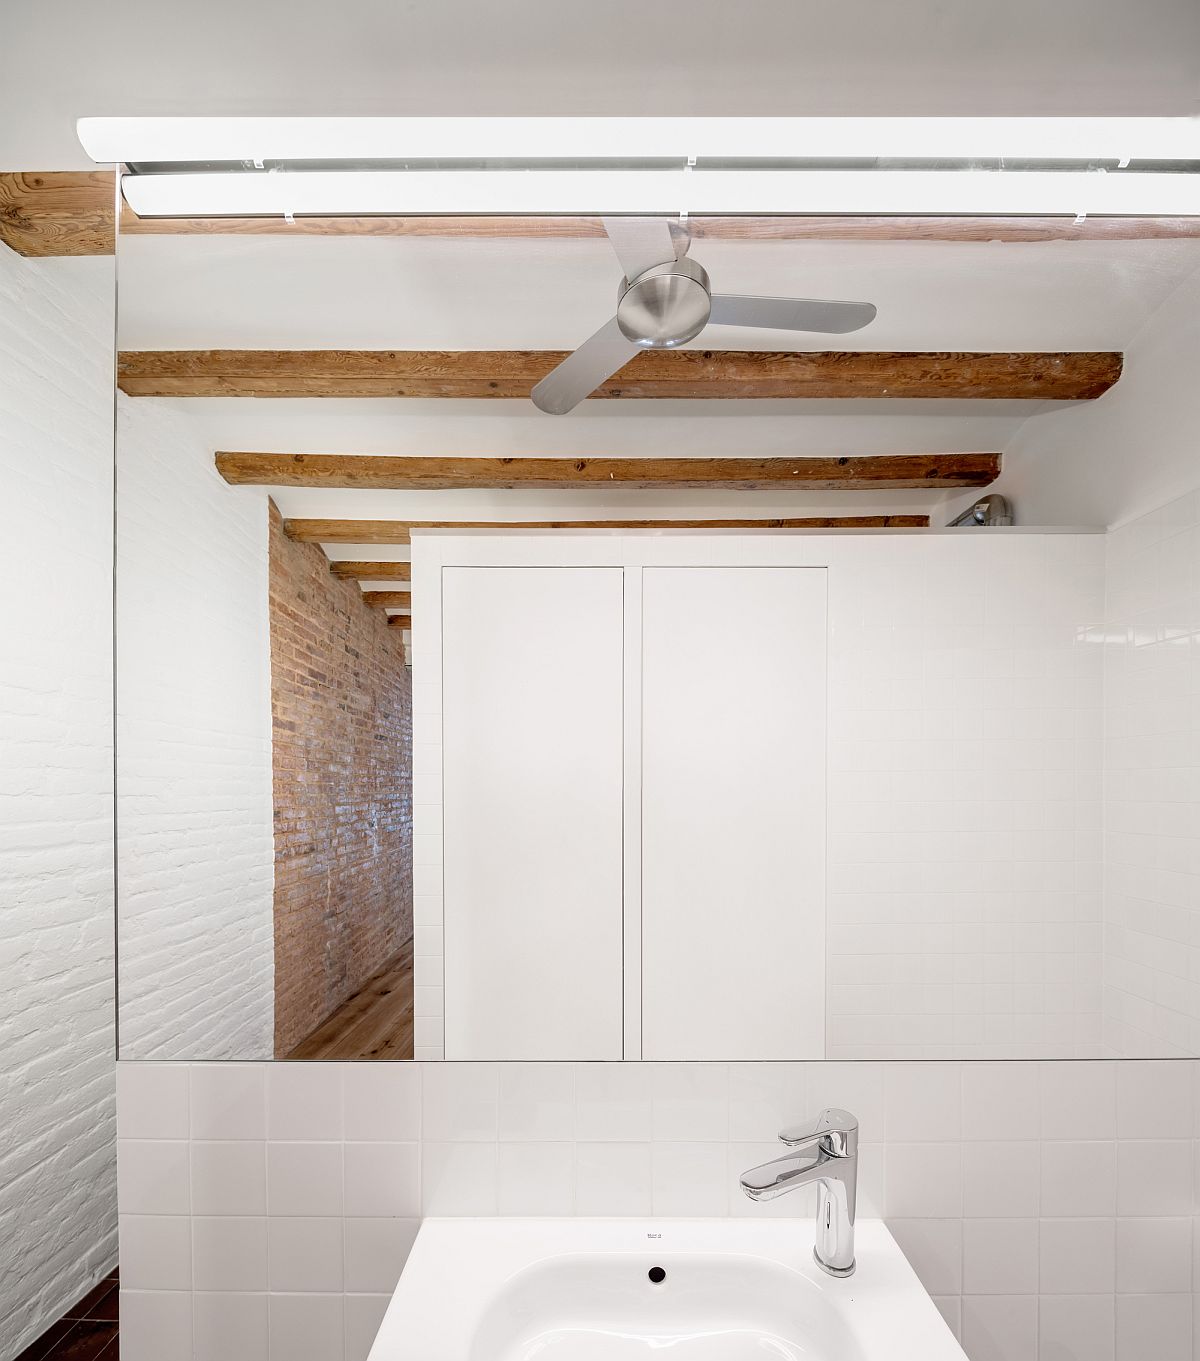 Modern bathroom and WC in white with wooden ceiling beams above